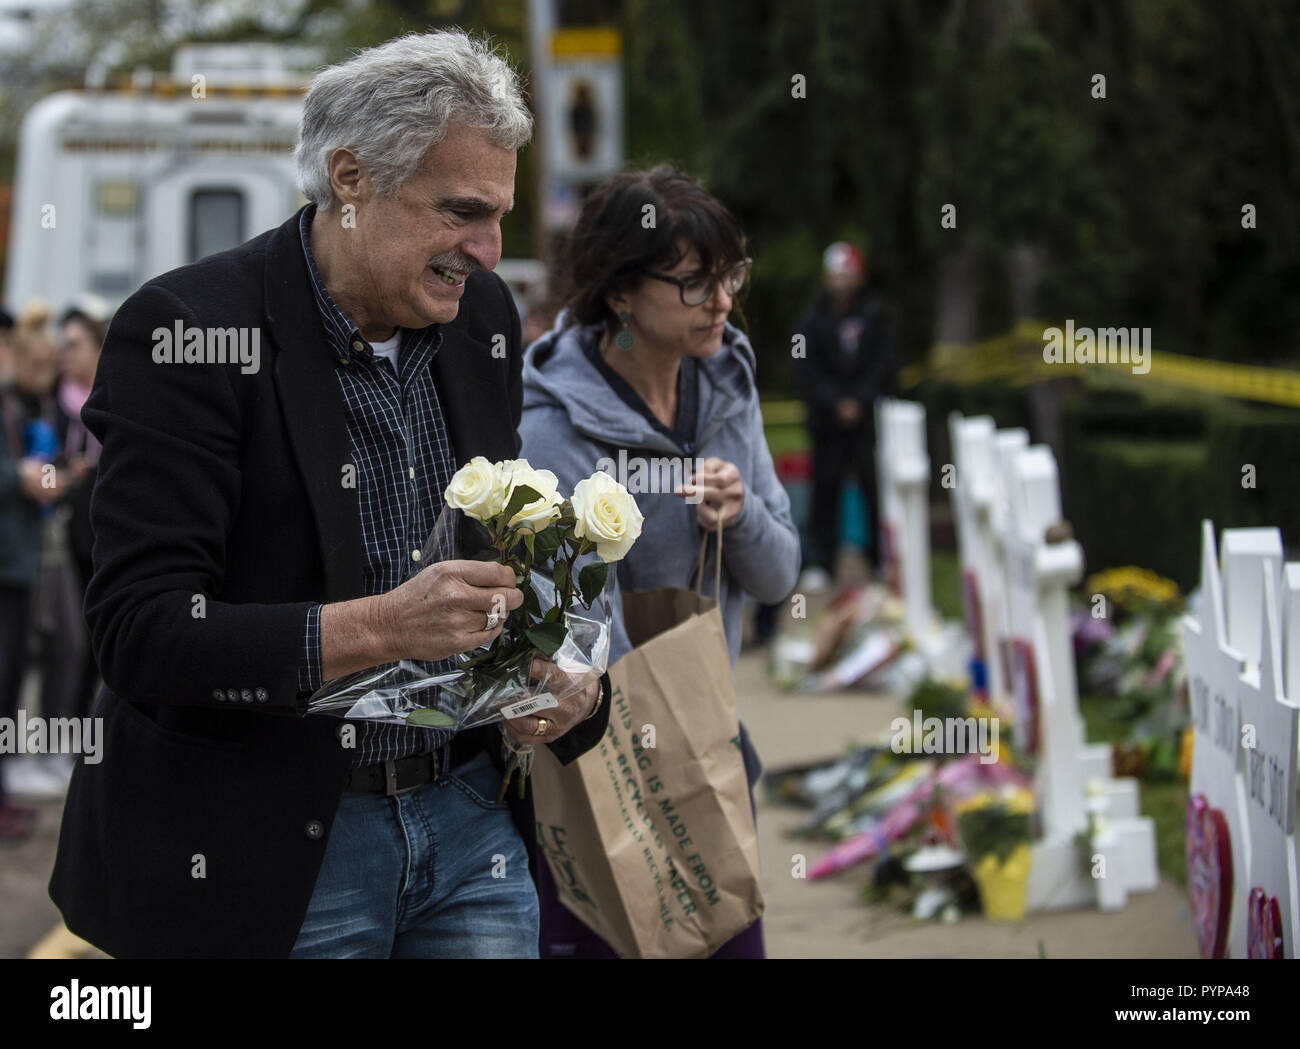 Pittsburgh, Pennsylvania, USA. 29th Oct, 2018. A mourner seen placing flowers on the memorials erected outside of the Tree of Life Synagogue in Squirrel Hill. Members of Pittsburgh and the Squirrel Hill community pay their respects at the memorial to the 11 victims of the Tree of Life Synagogue massacre perpetrated by suspect Robert Bowers on Saturday, October 27. Credit: Matthew Hatcher/SOPA Images/ZUMA Wire/Alamy Live News Stock Photo